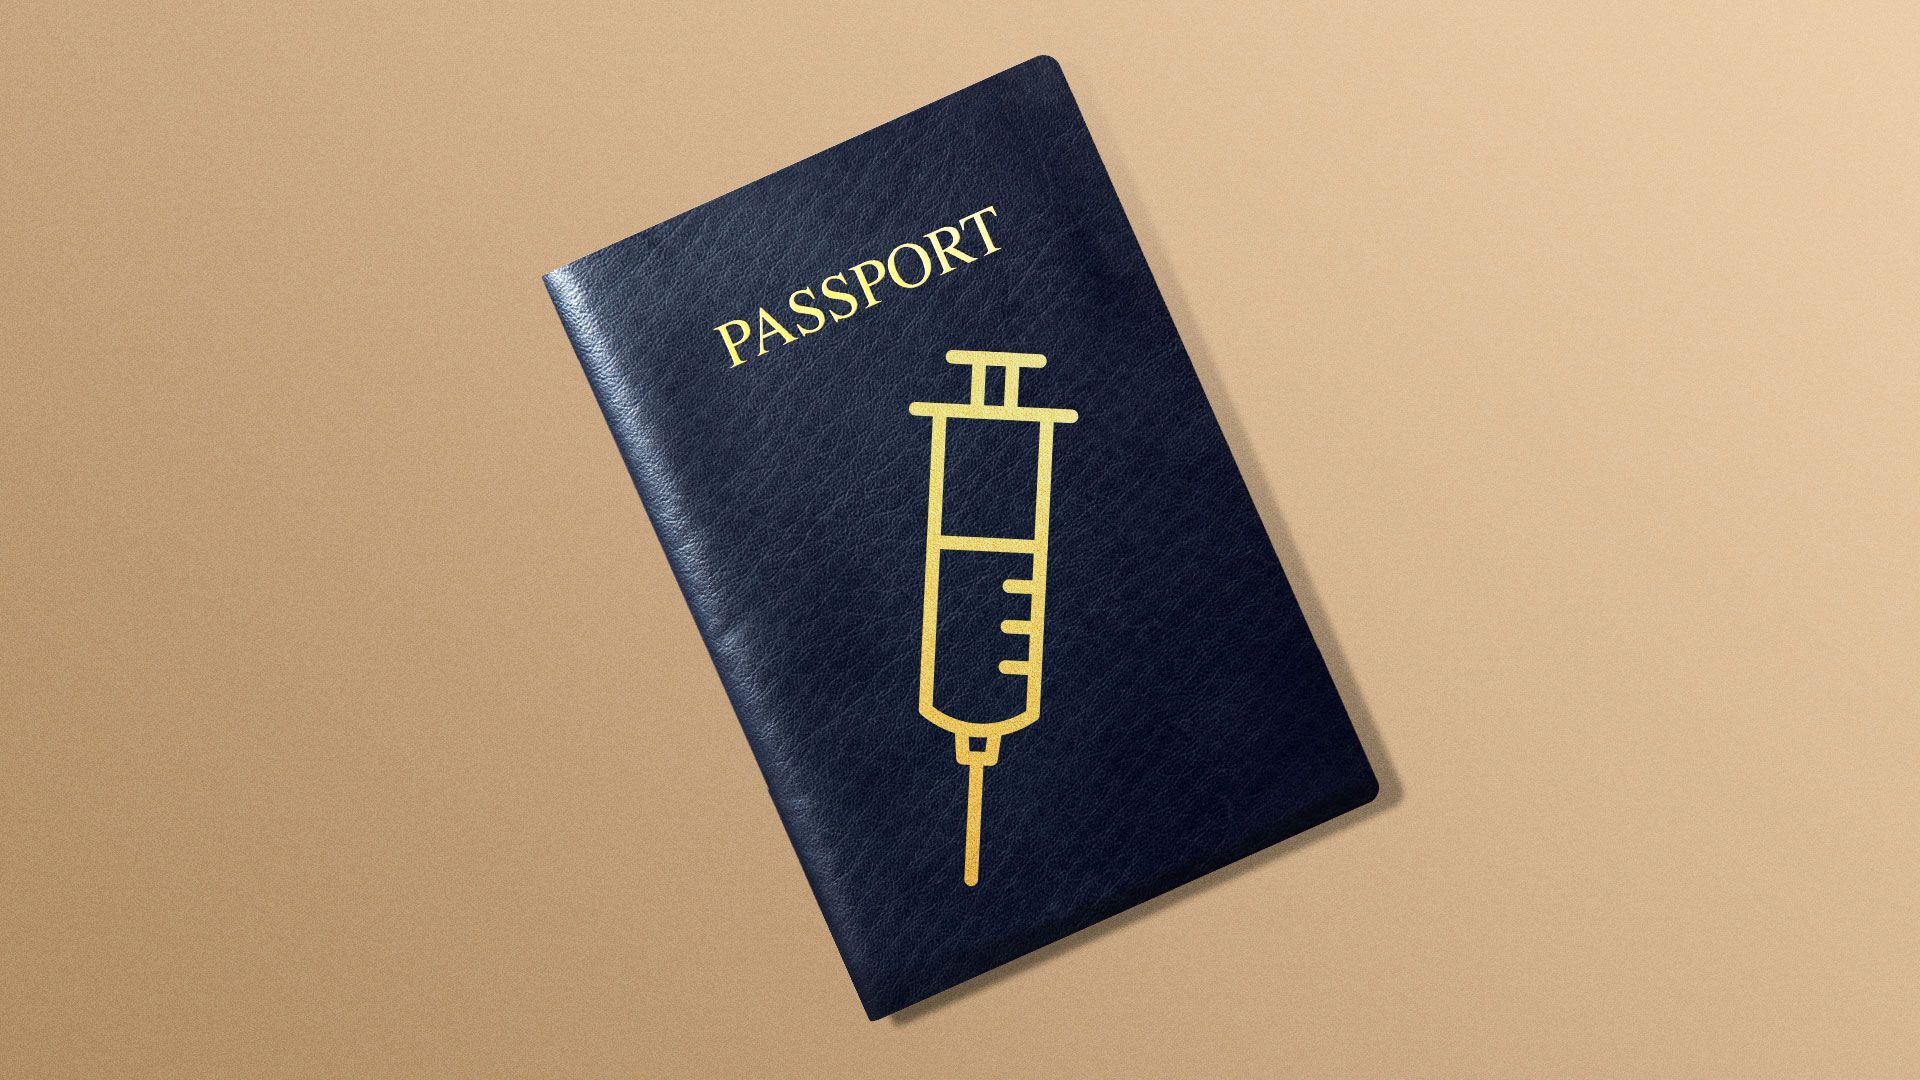 Illustration of a passport with a syringe on the cover